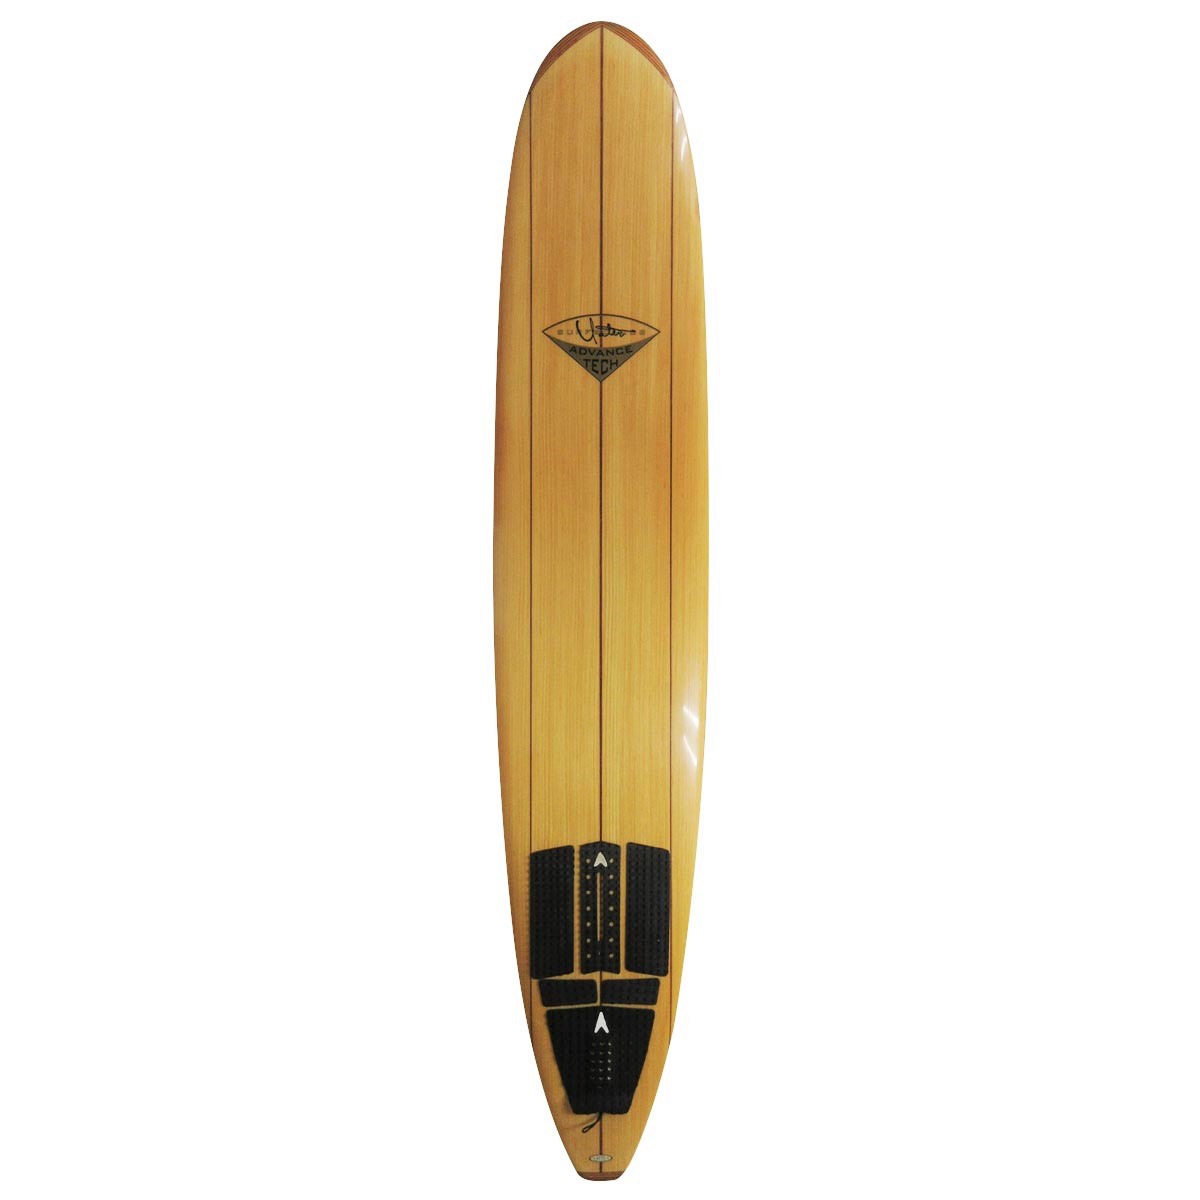  / YATER / Allround 9`10 Woody Surftech